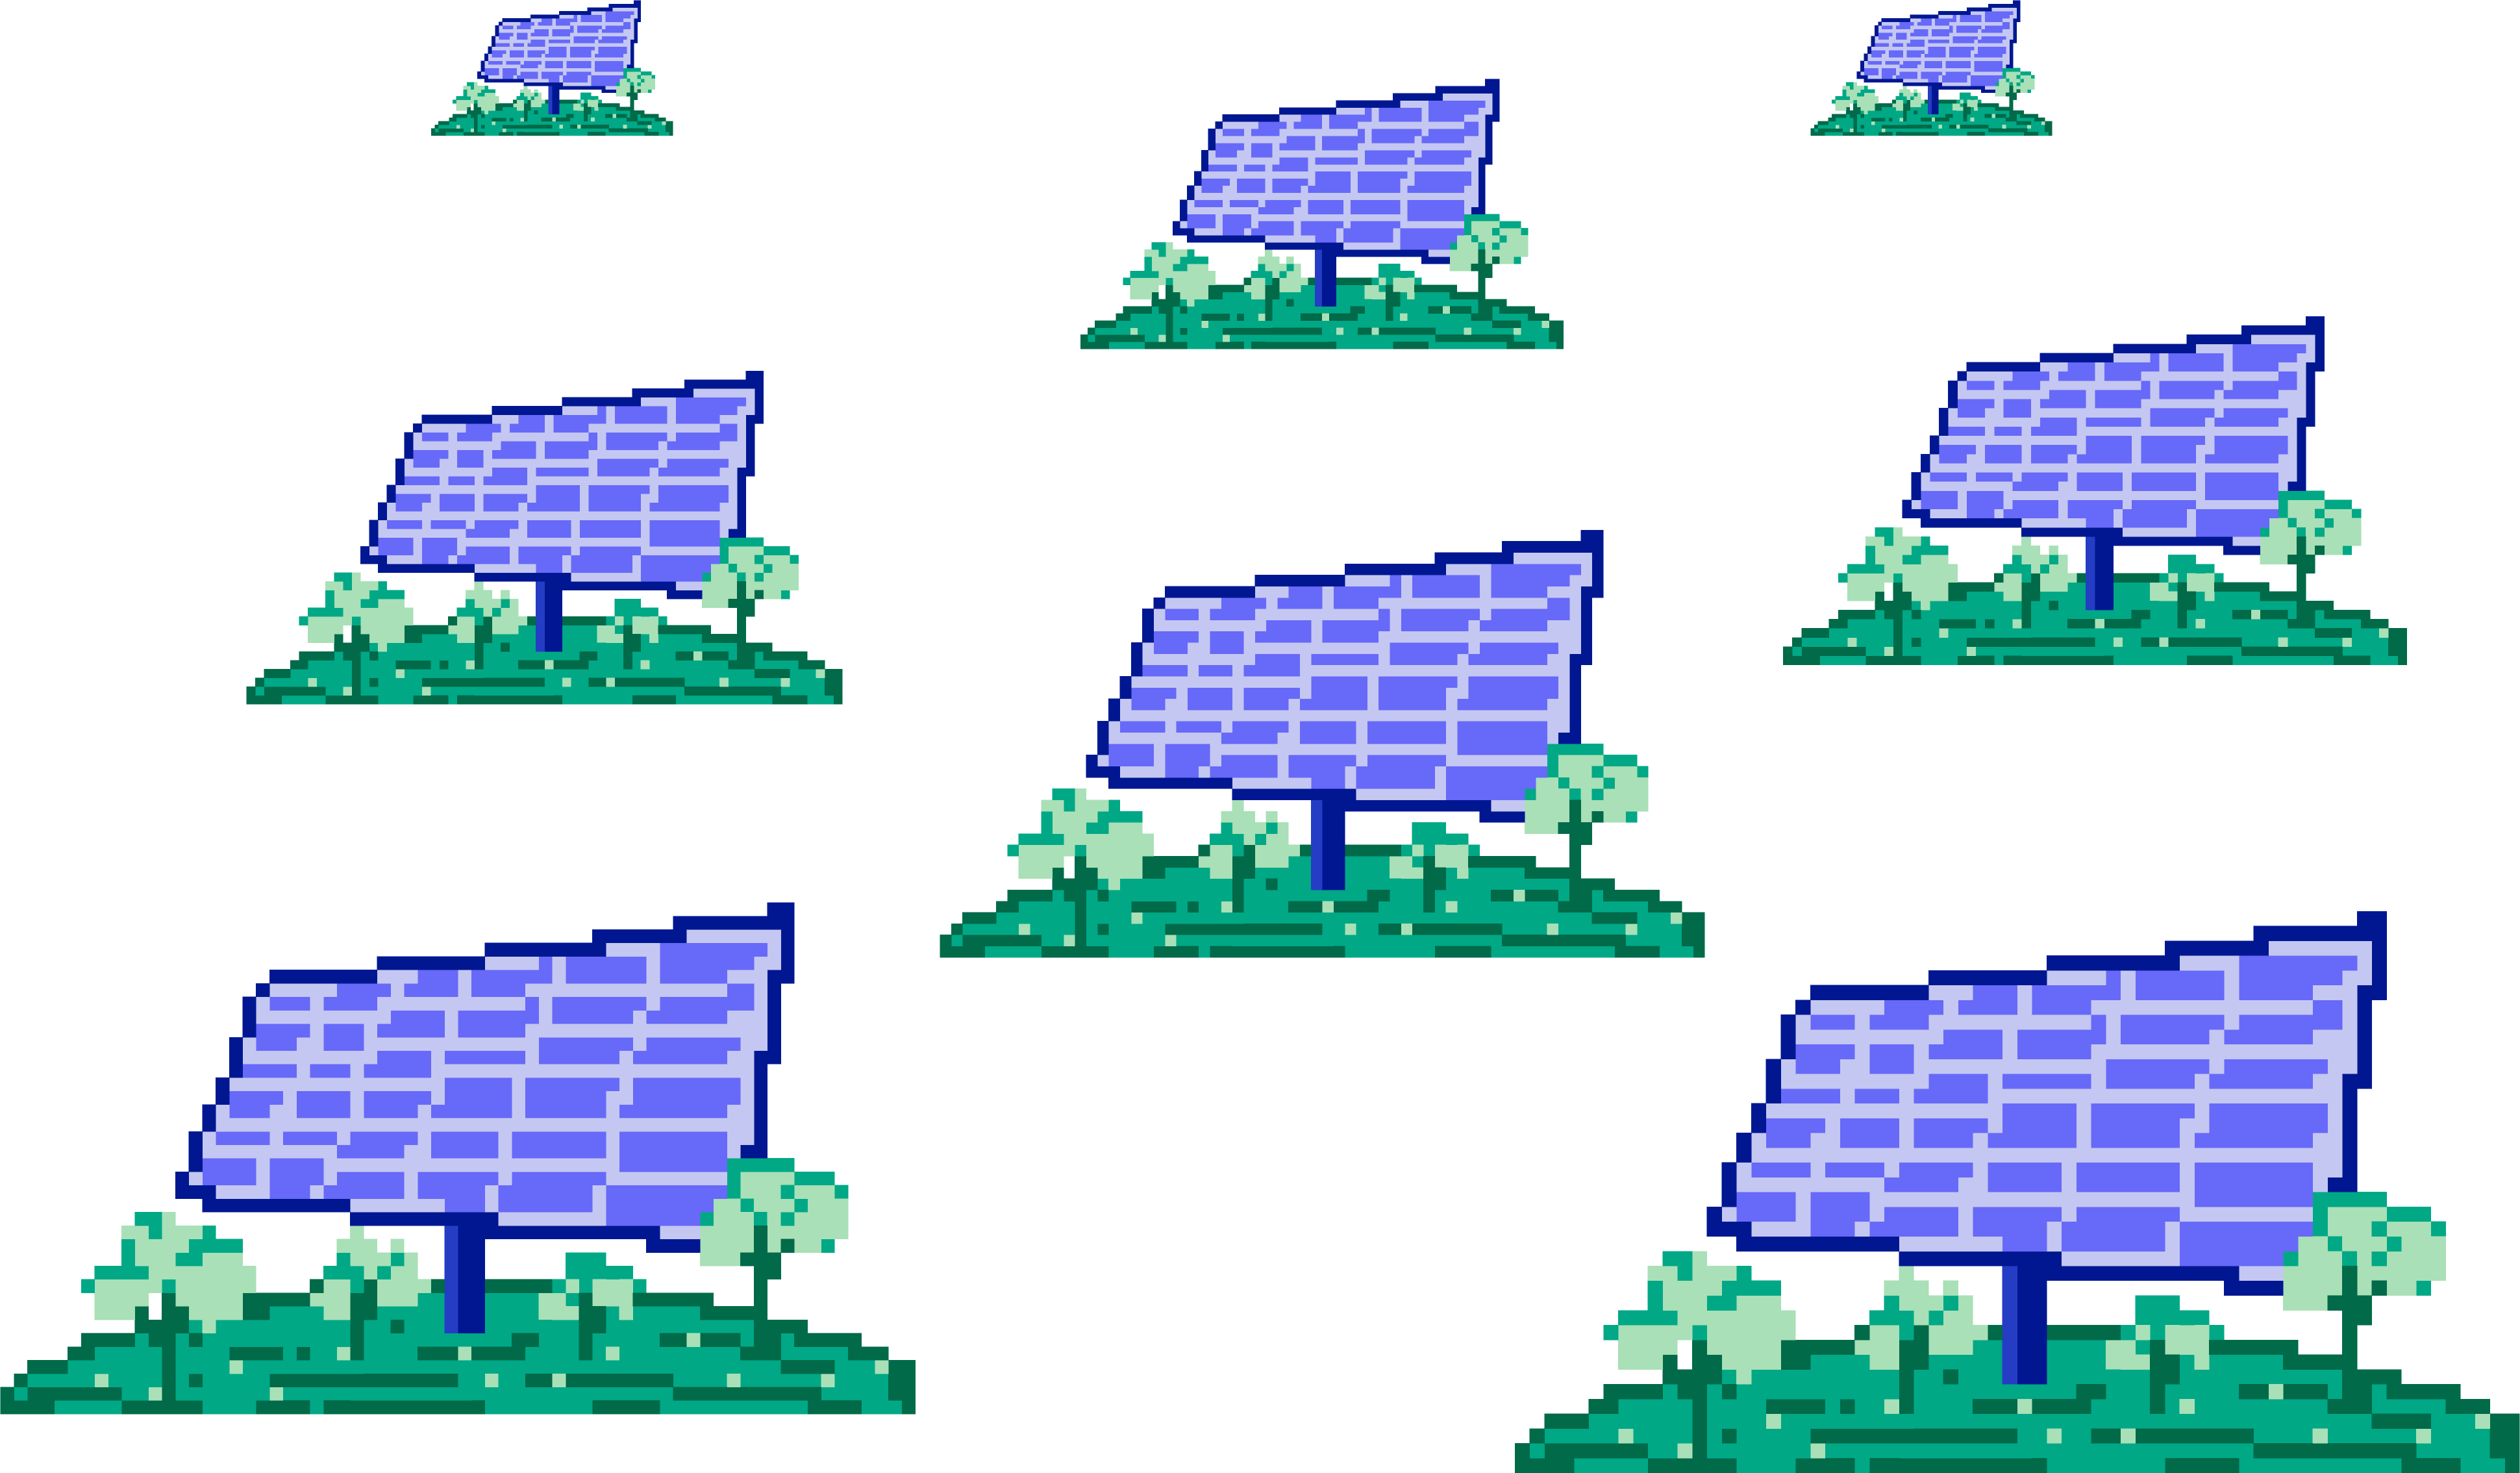 _images/Solar_energy.png